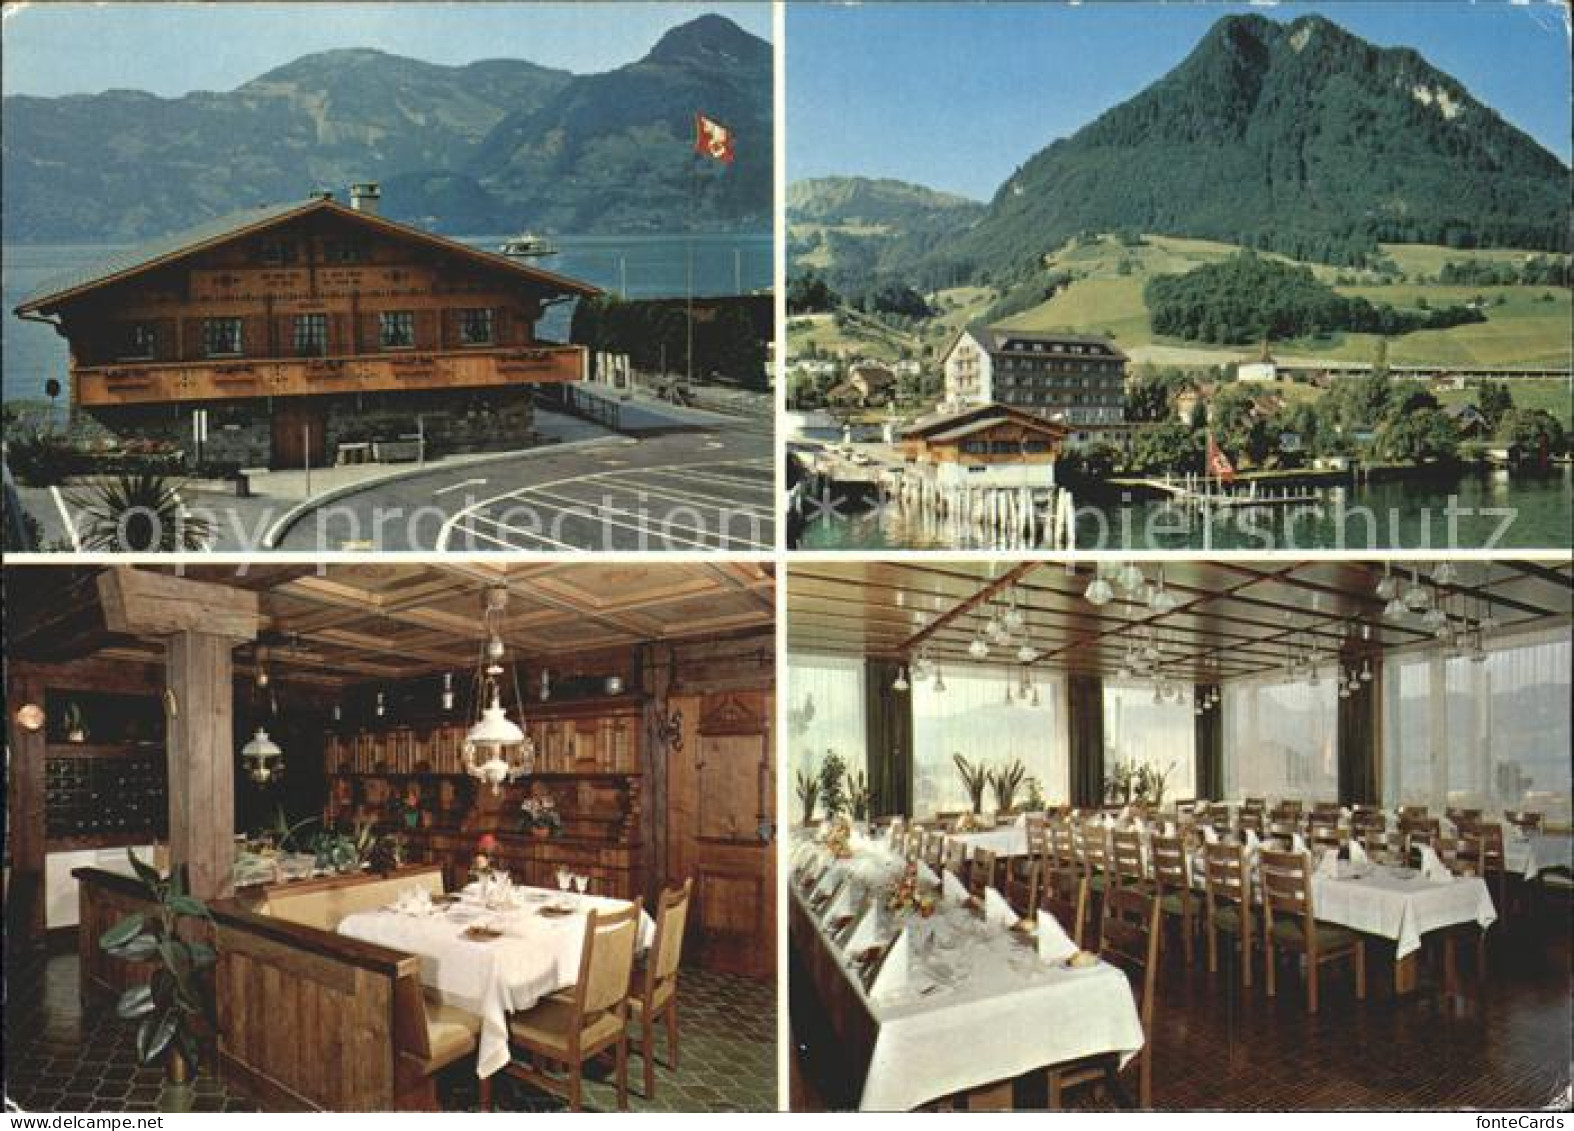 11965054 Beckenried Sternen Hotel Beckenried - Other & Unclassified